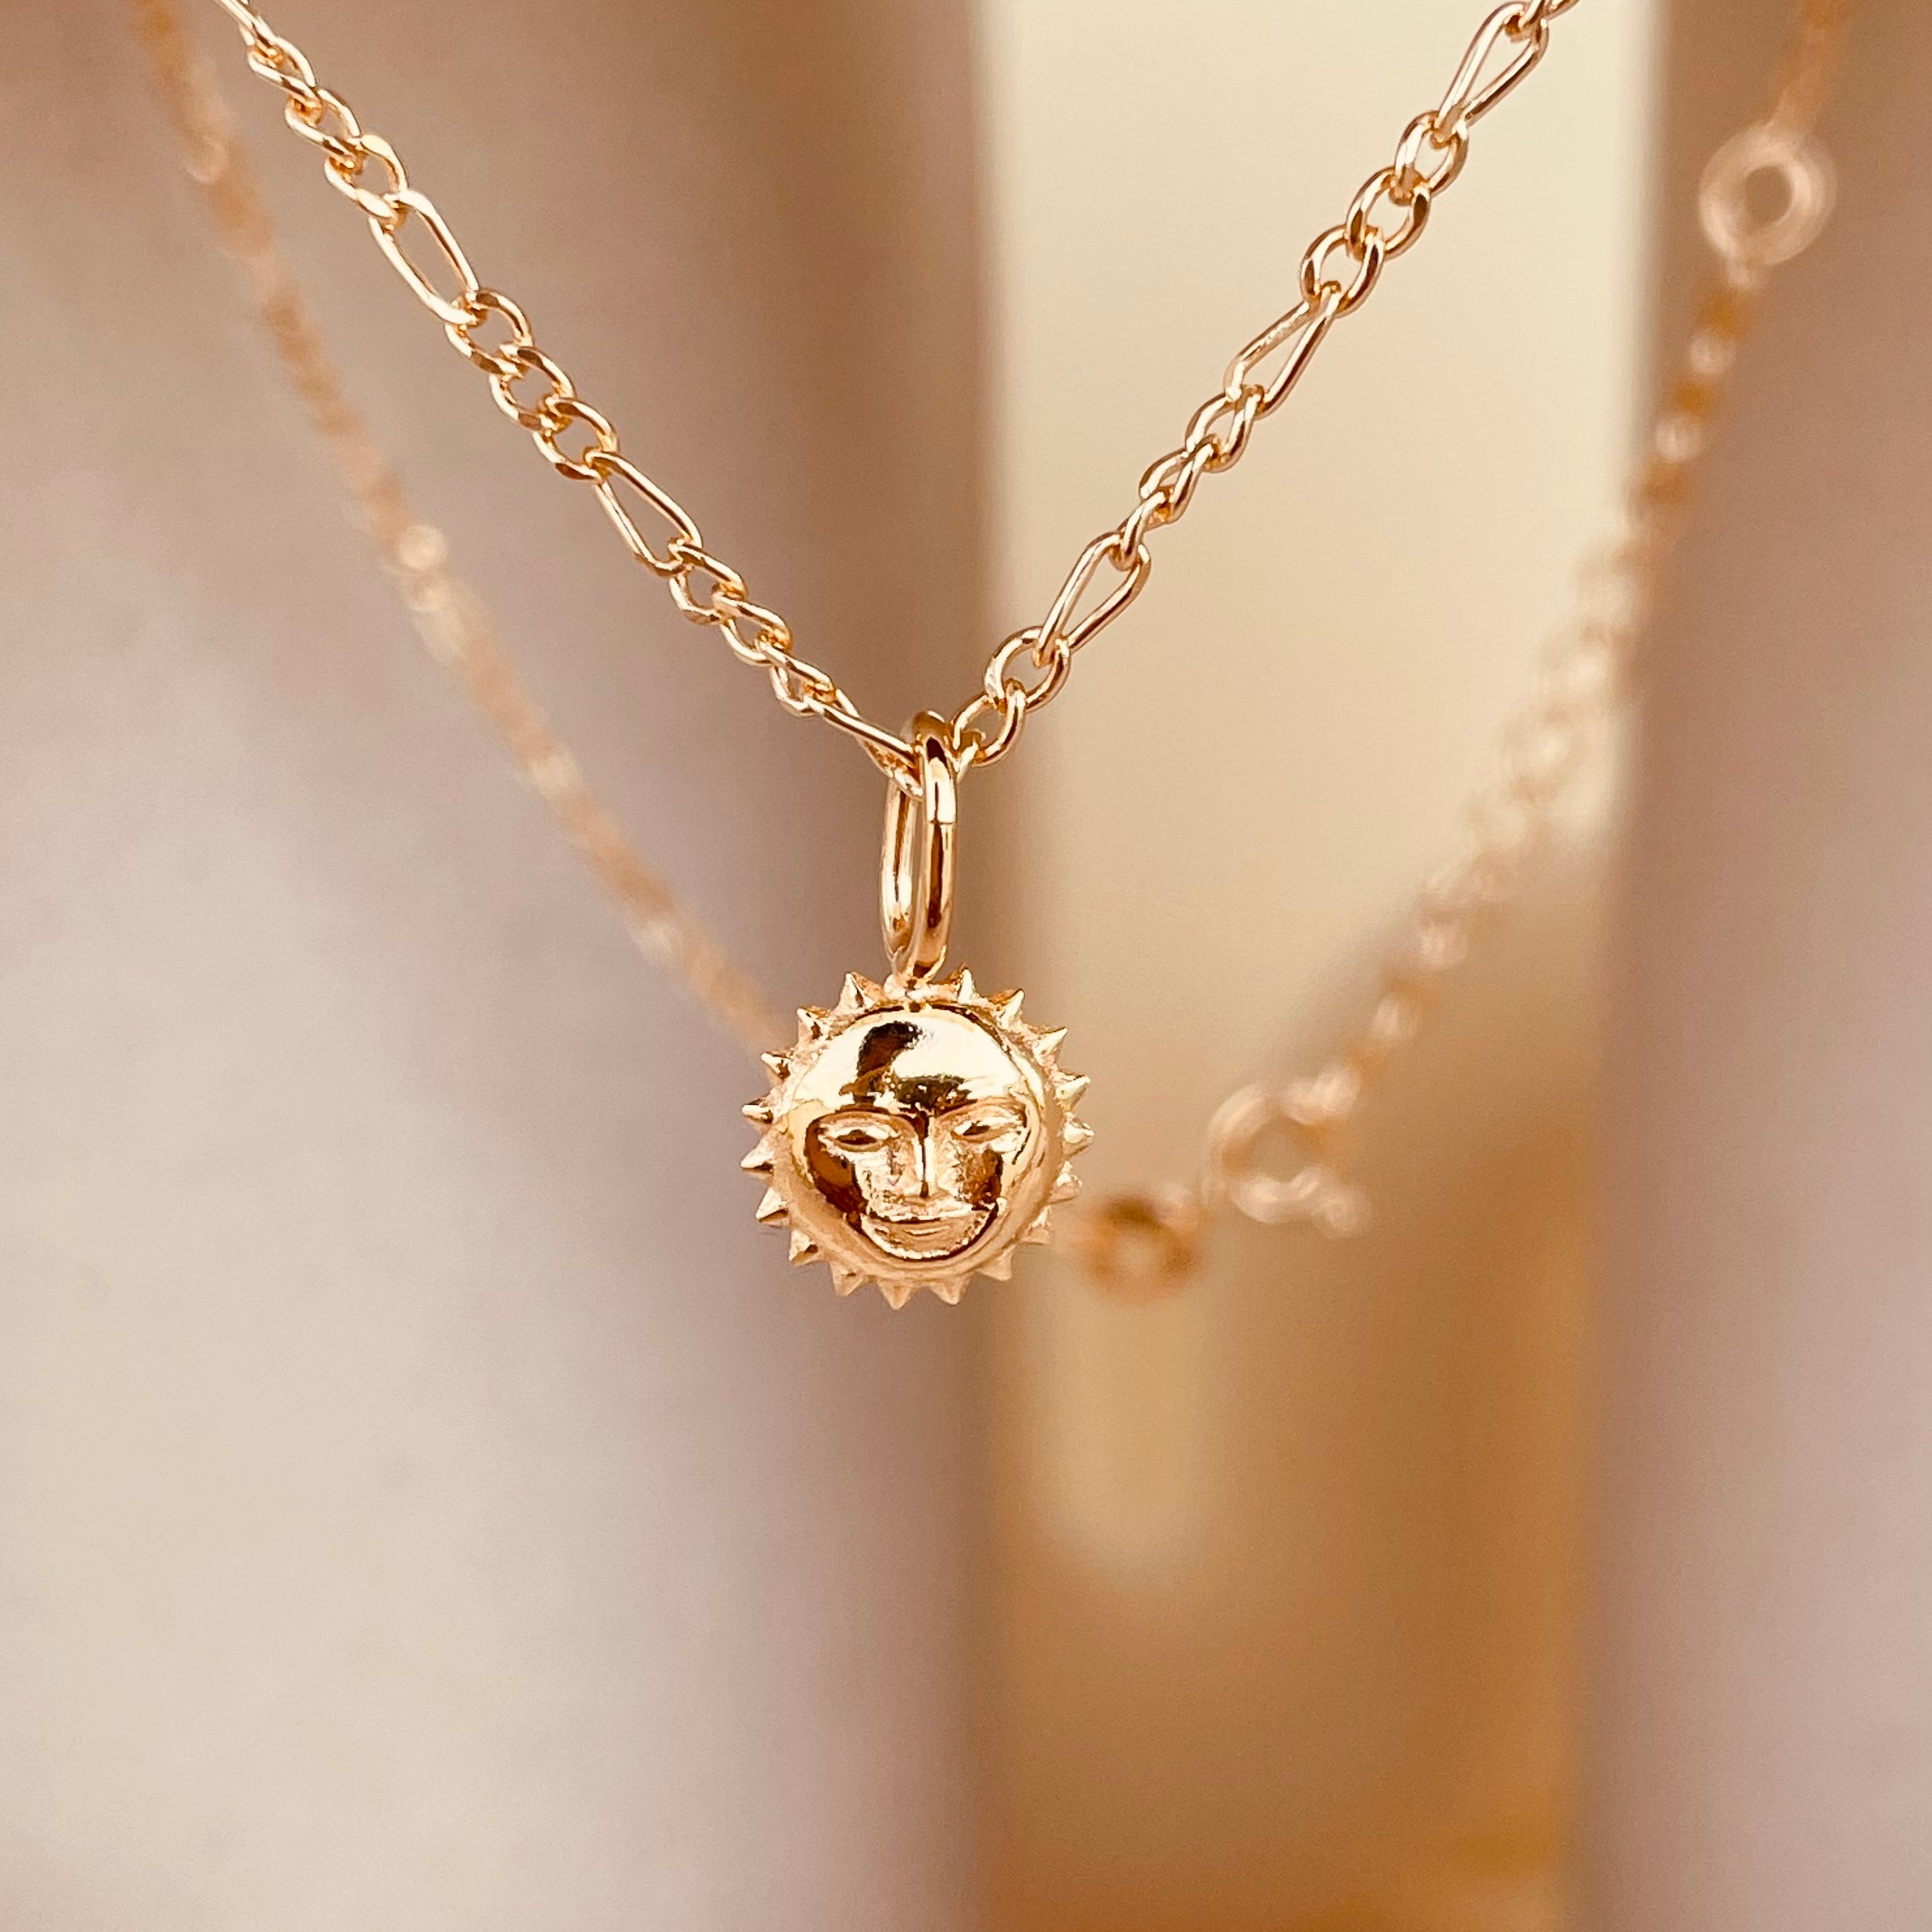 Dainty Steller Sun Charm Necklace with Figaro Chain - Octonov 